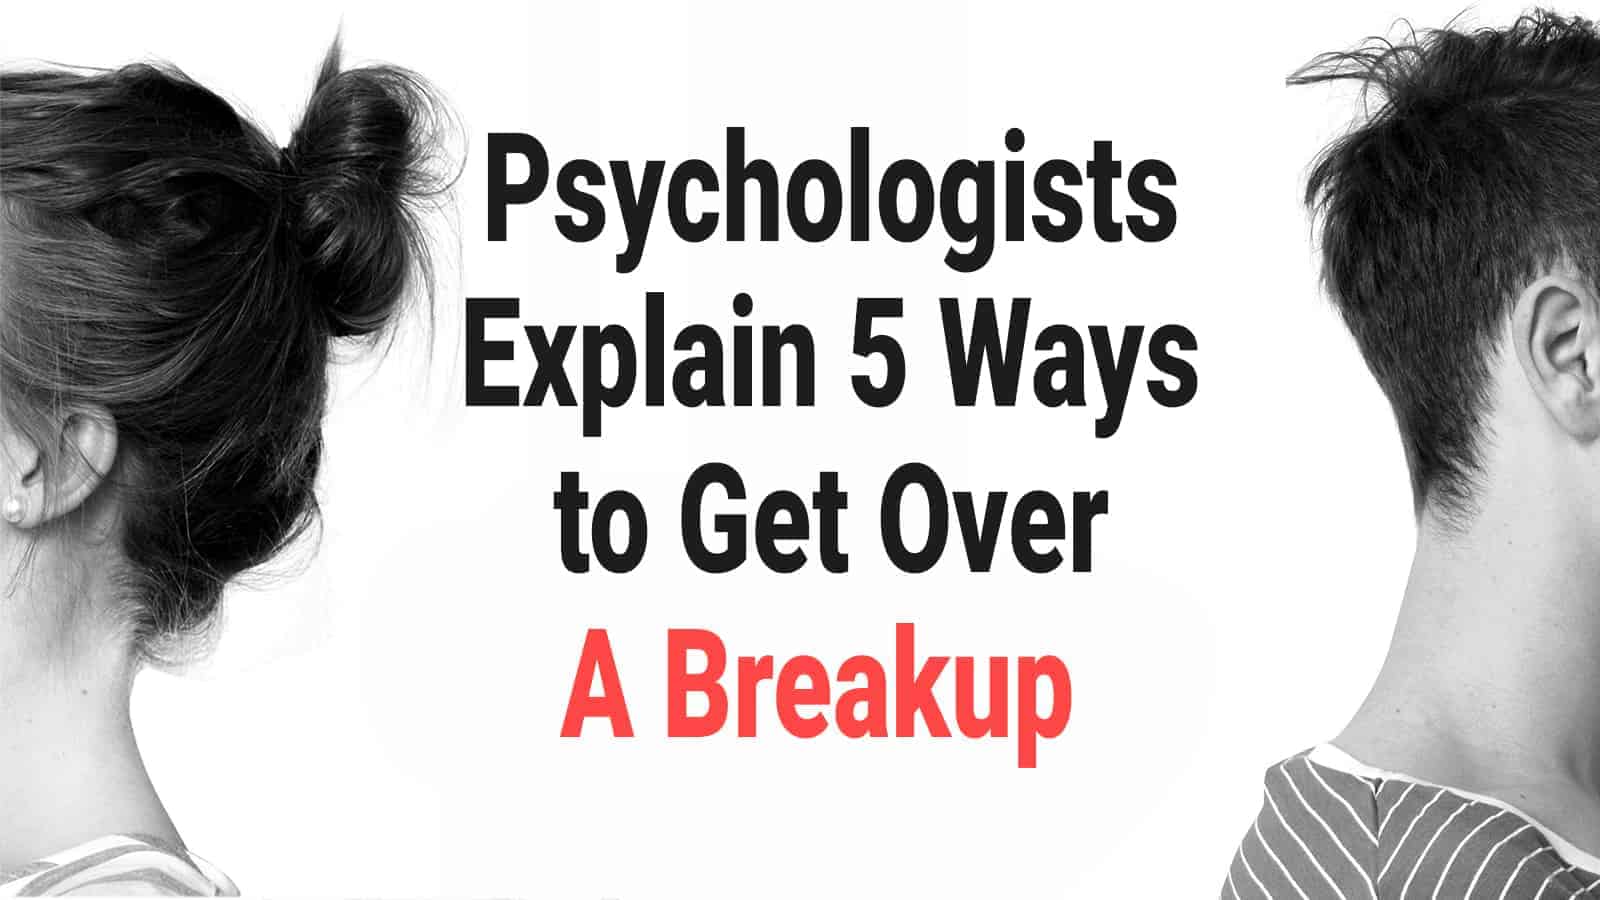 Psychologists Explain 5 Ways to Get Over A Breakup